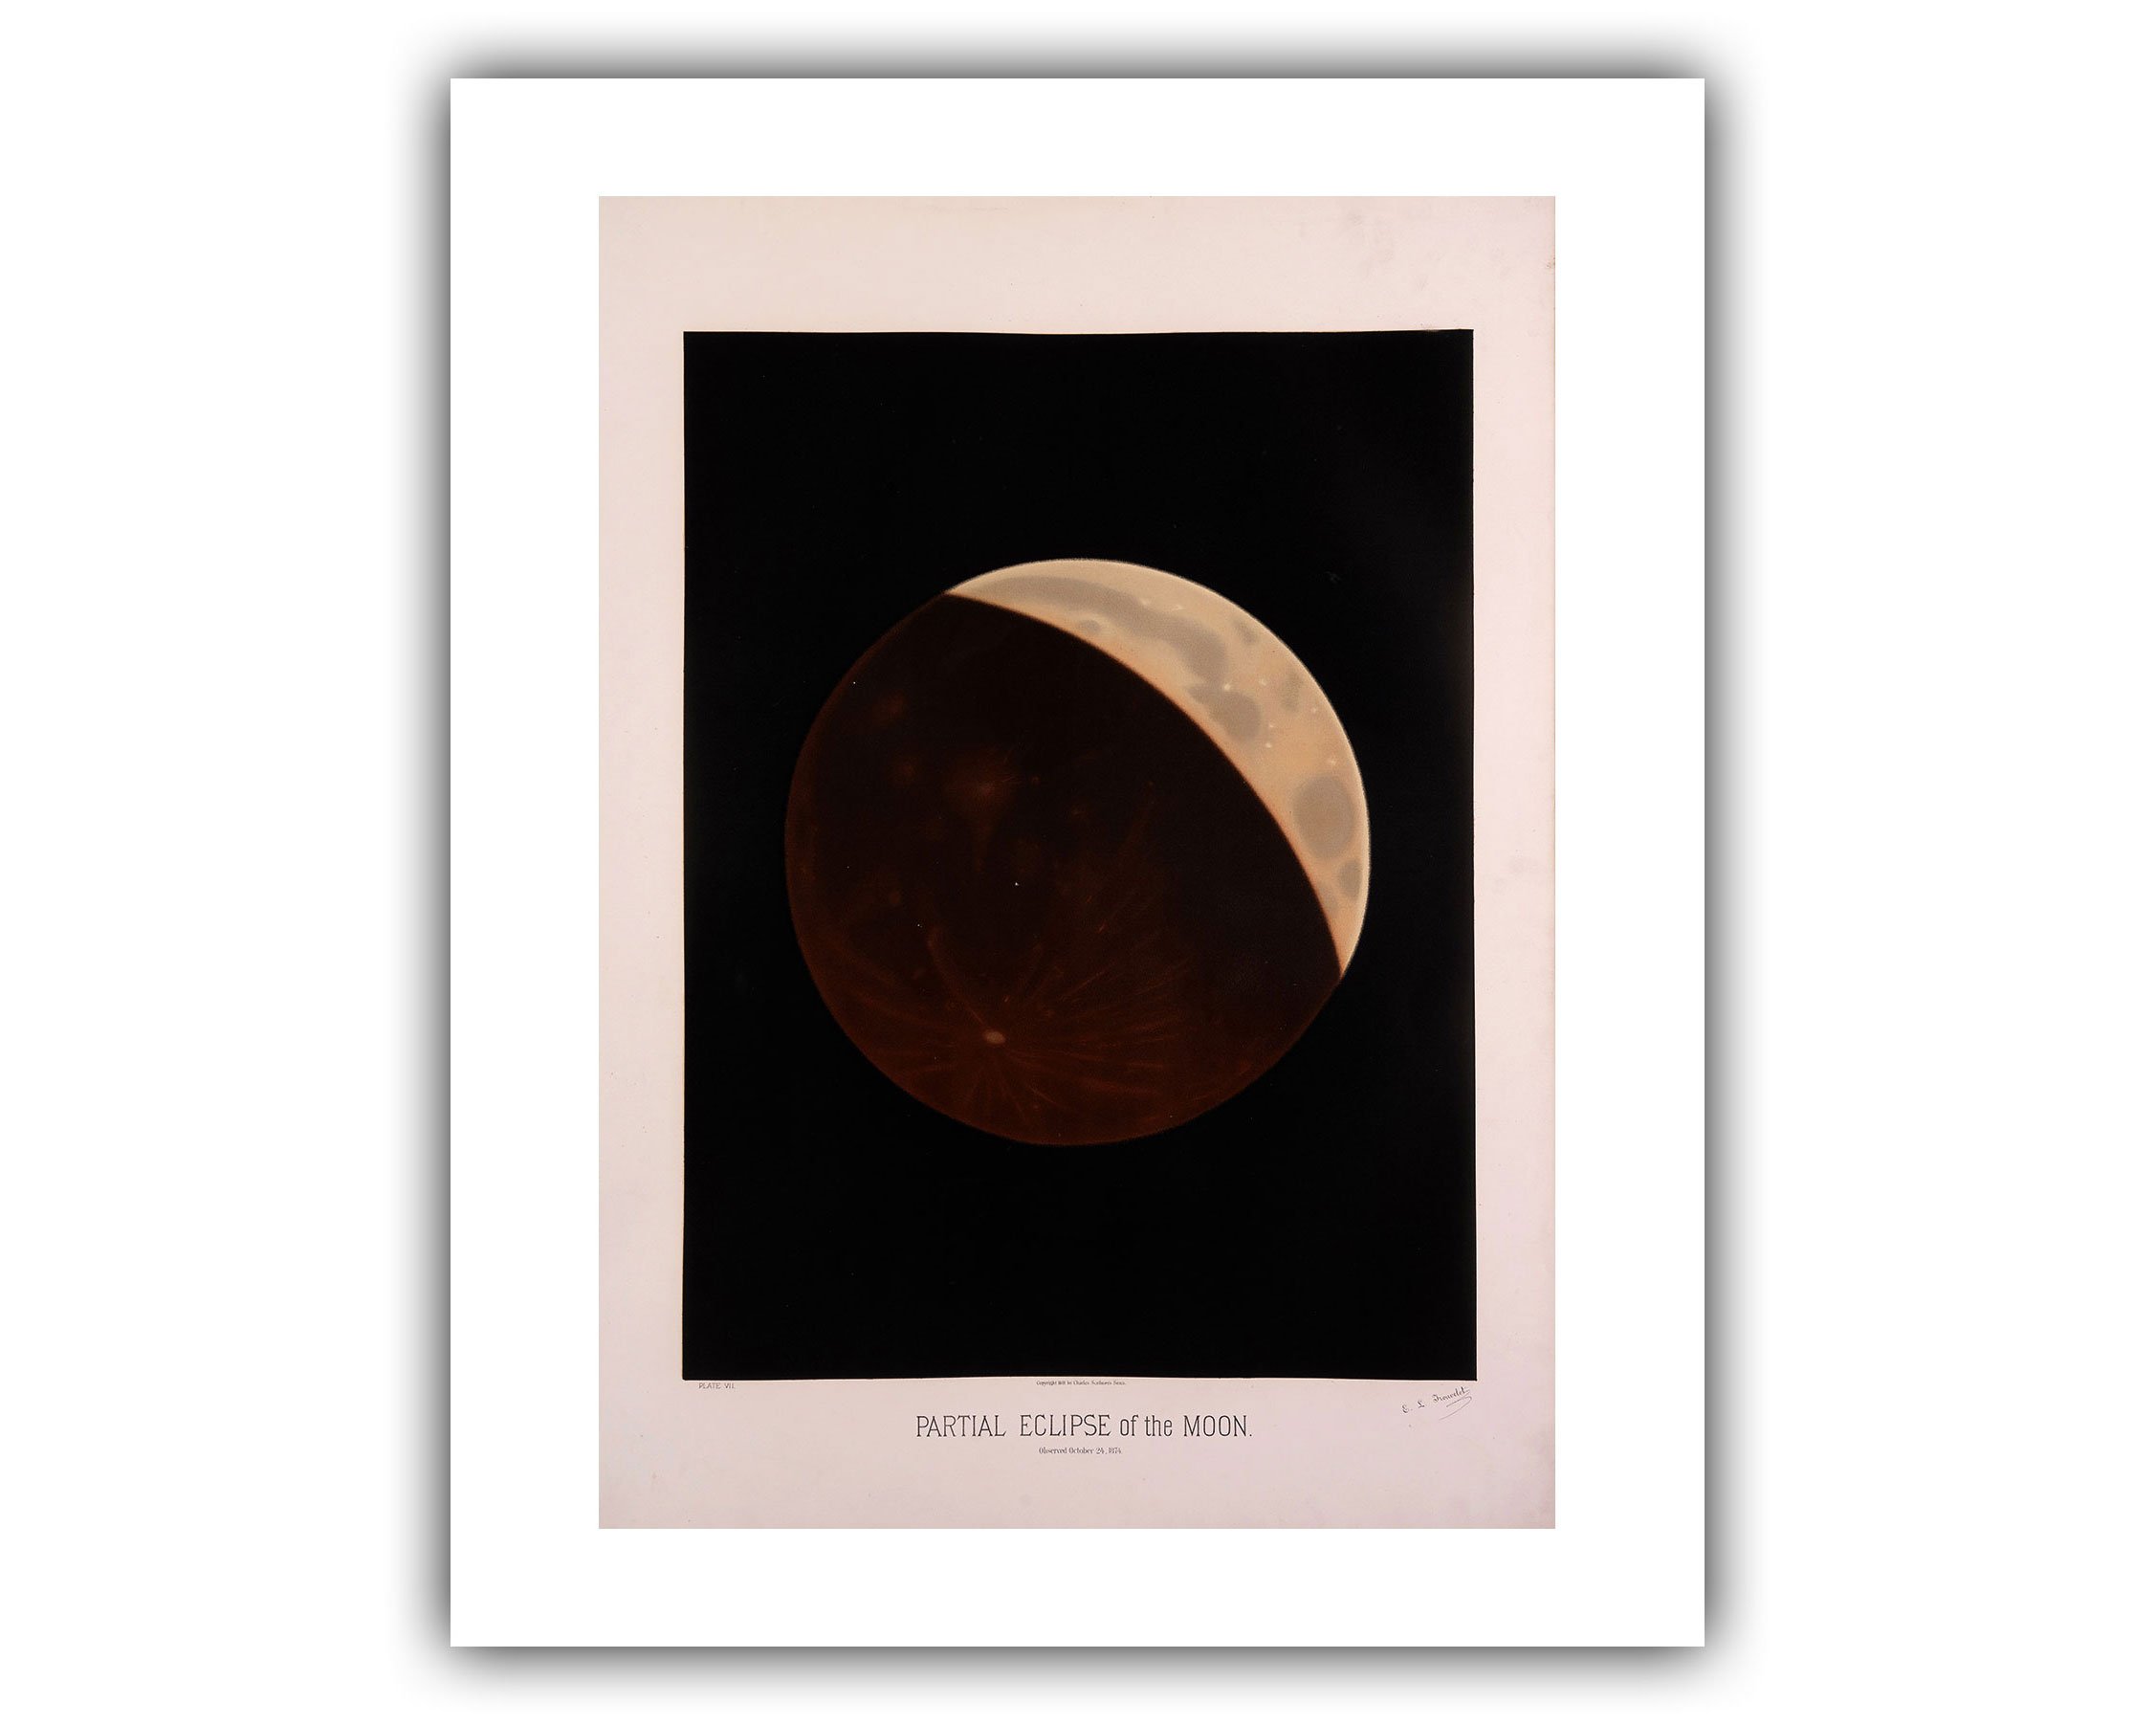 0054 The Trouvelot Astronomical Drawings 1882 AstronomySpace PrintPoster Etienne Leopold Trouvelot: Partial Eclipse of the Moon.